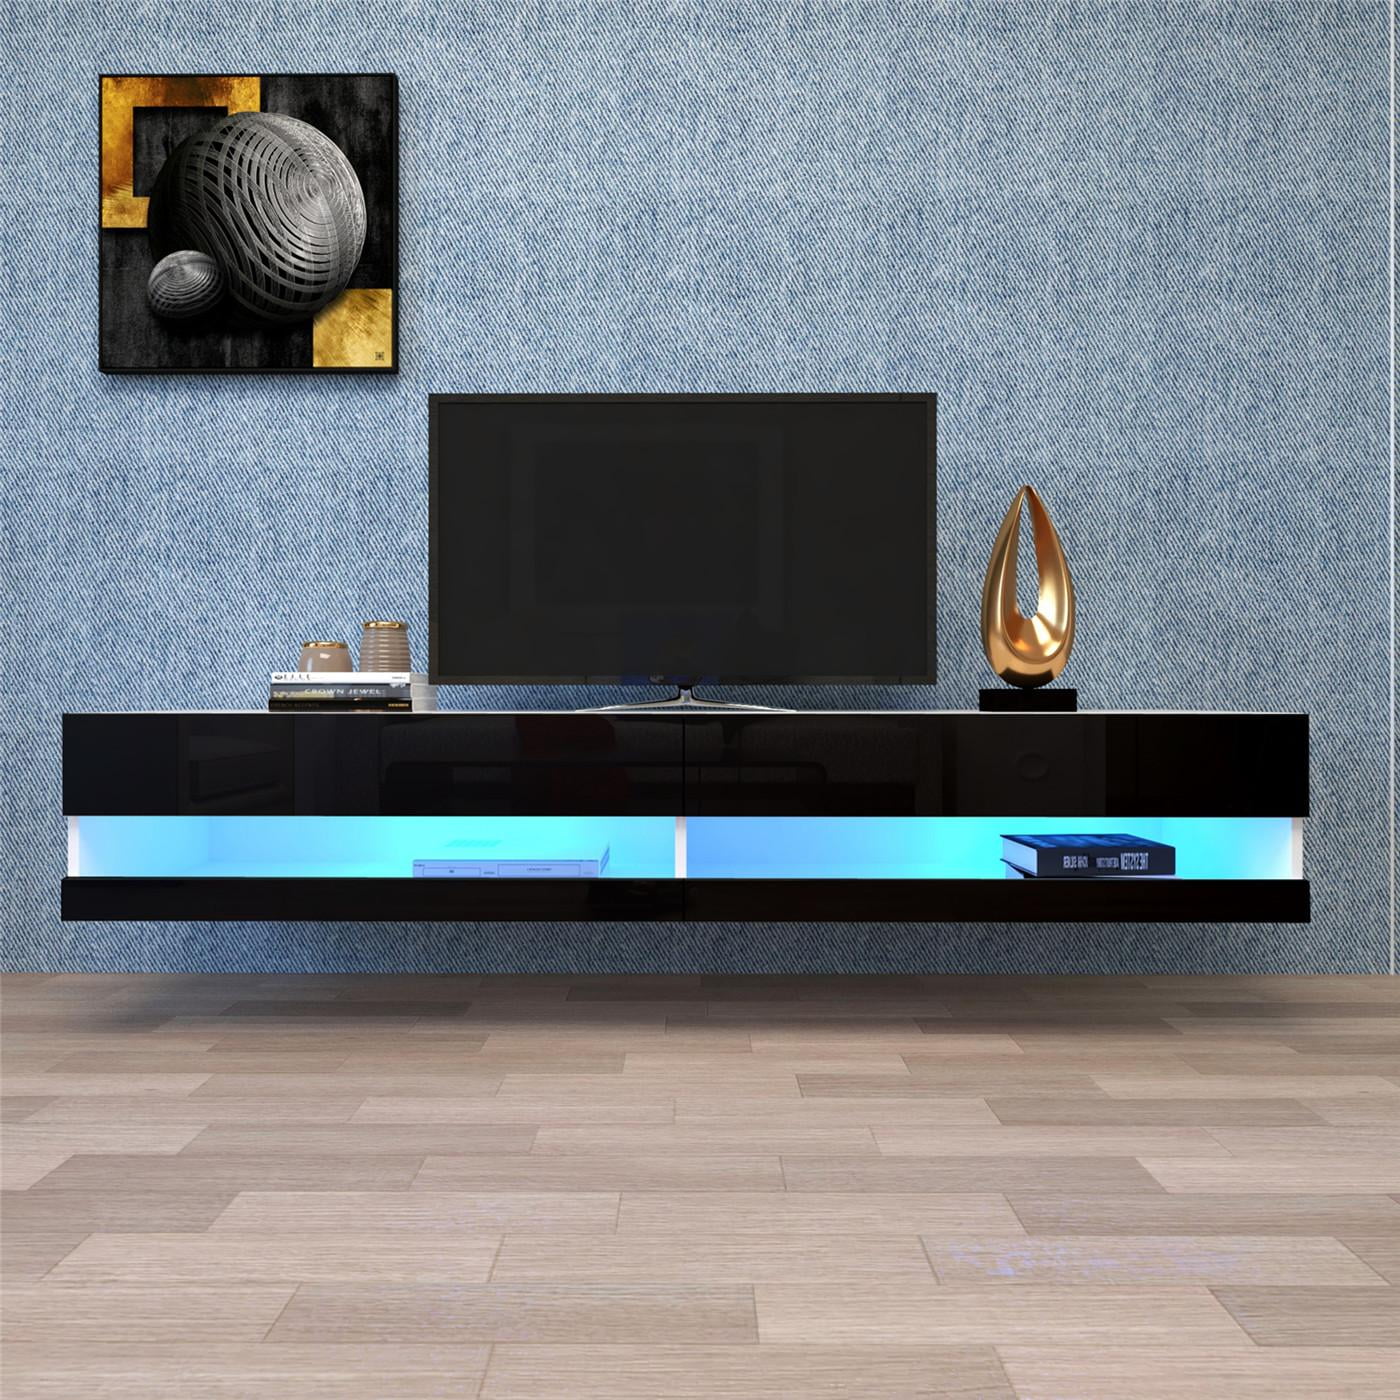 Details about   80" Wall Mounted Floating TV Stand TV Cabinet with 20 Color LEDs Black/White 